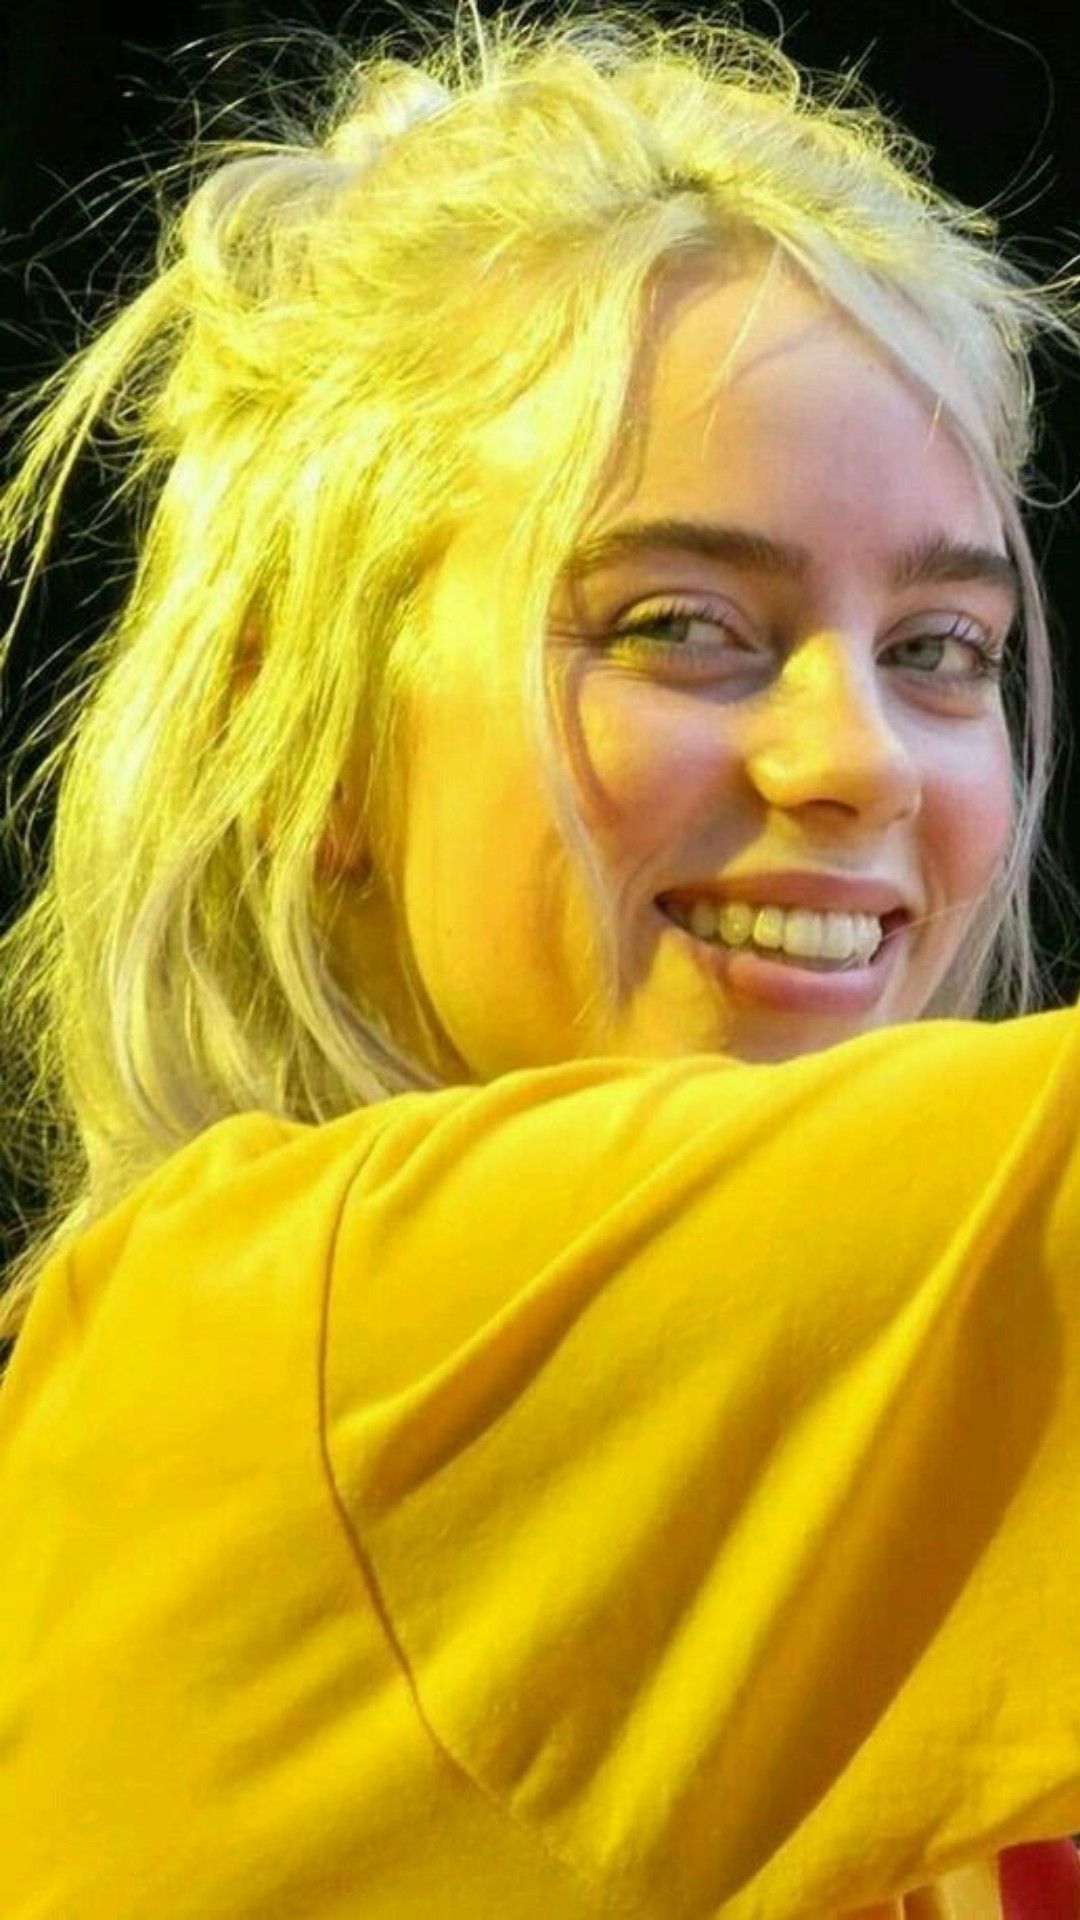 Billie Eilish wallpaper for iPhone with high-resolution 1080x1920 pixel. You can use this wallpaper for your iPhone 5, 6, 7, 8, X, XS, XR backgrounds, Mobile Screensaver, or iPad Lock Screen - Billie Eilish